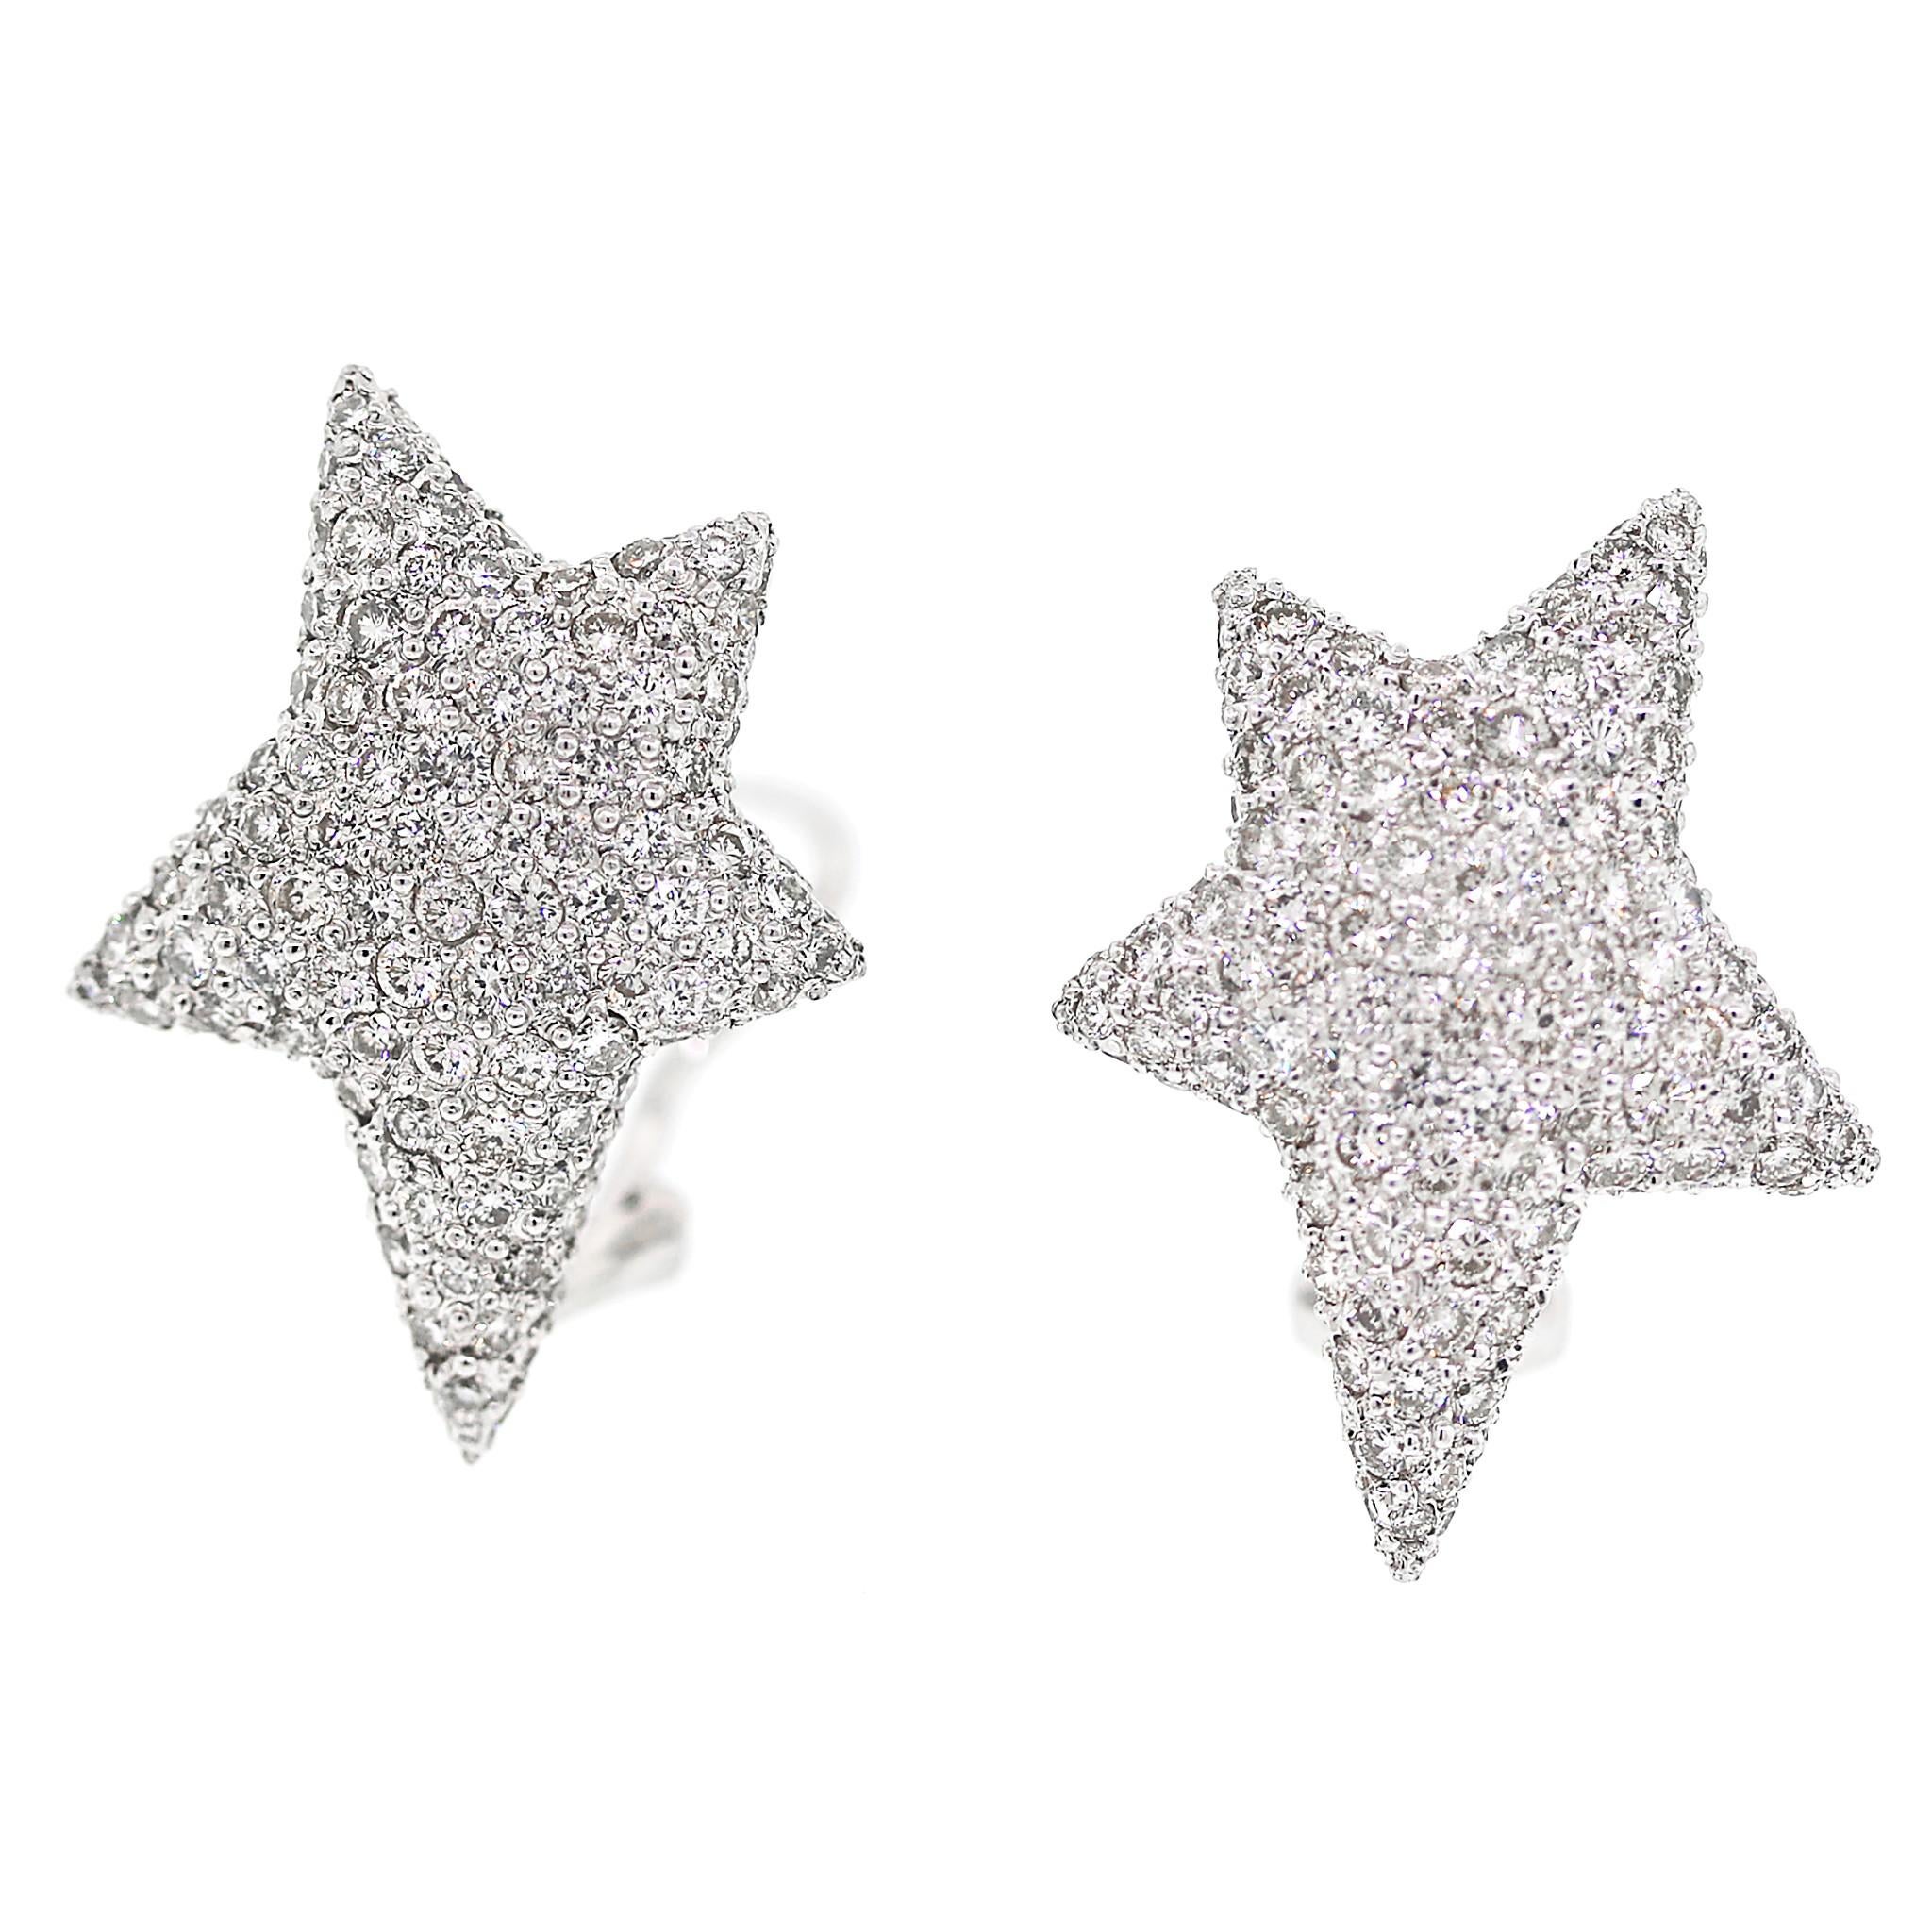 Round Cut 3.32 carat Diamond Shooting Star Earrings in Platinum For Sale